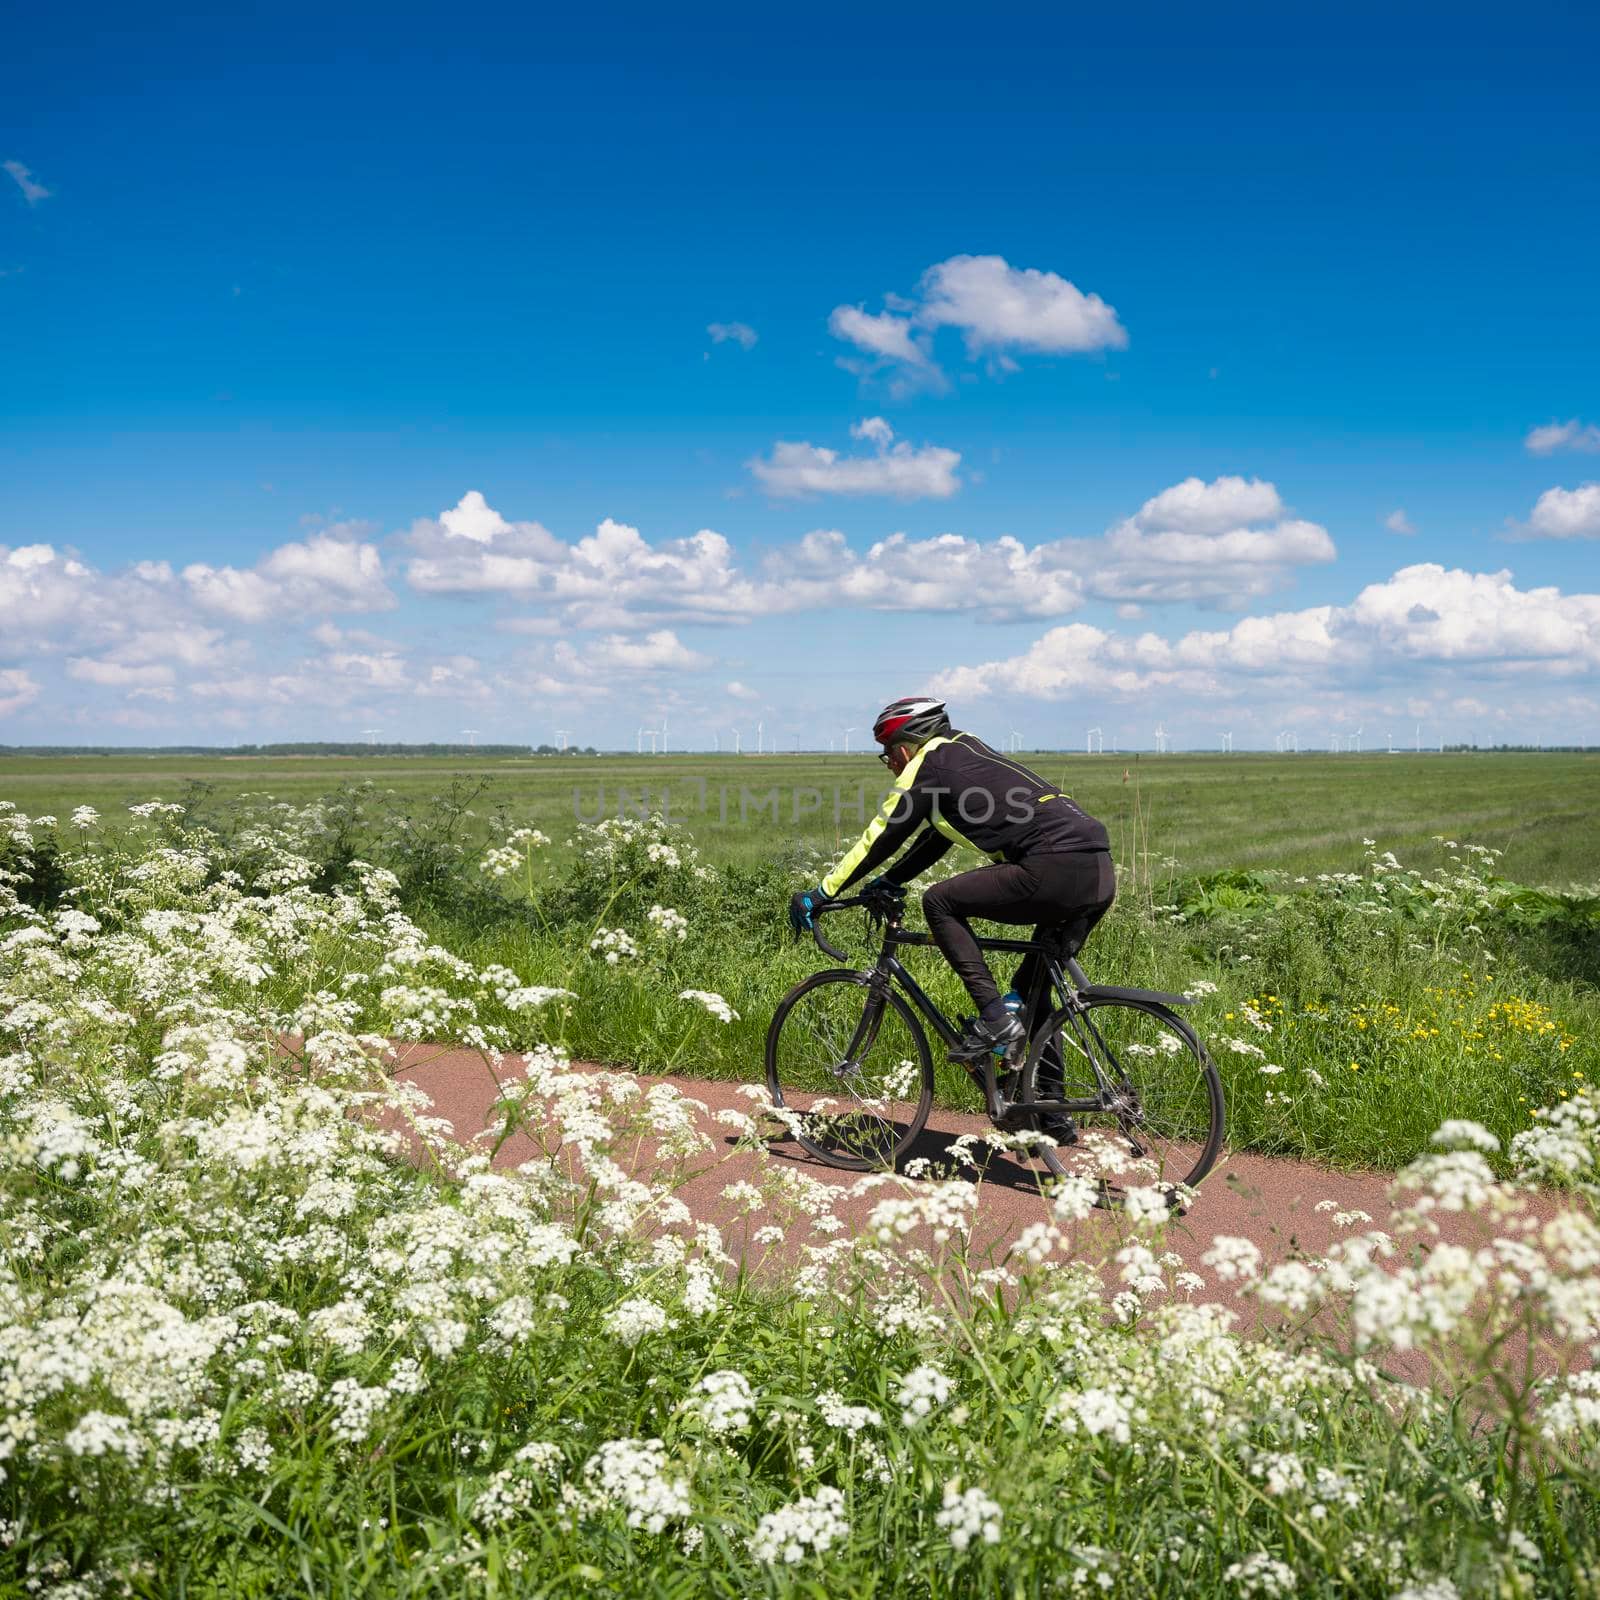 eemnes, netherlands, 28 may 2021: man rides bicycle near summer flowers and vast area of meadows in holland near amersfoort under blue sky